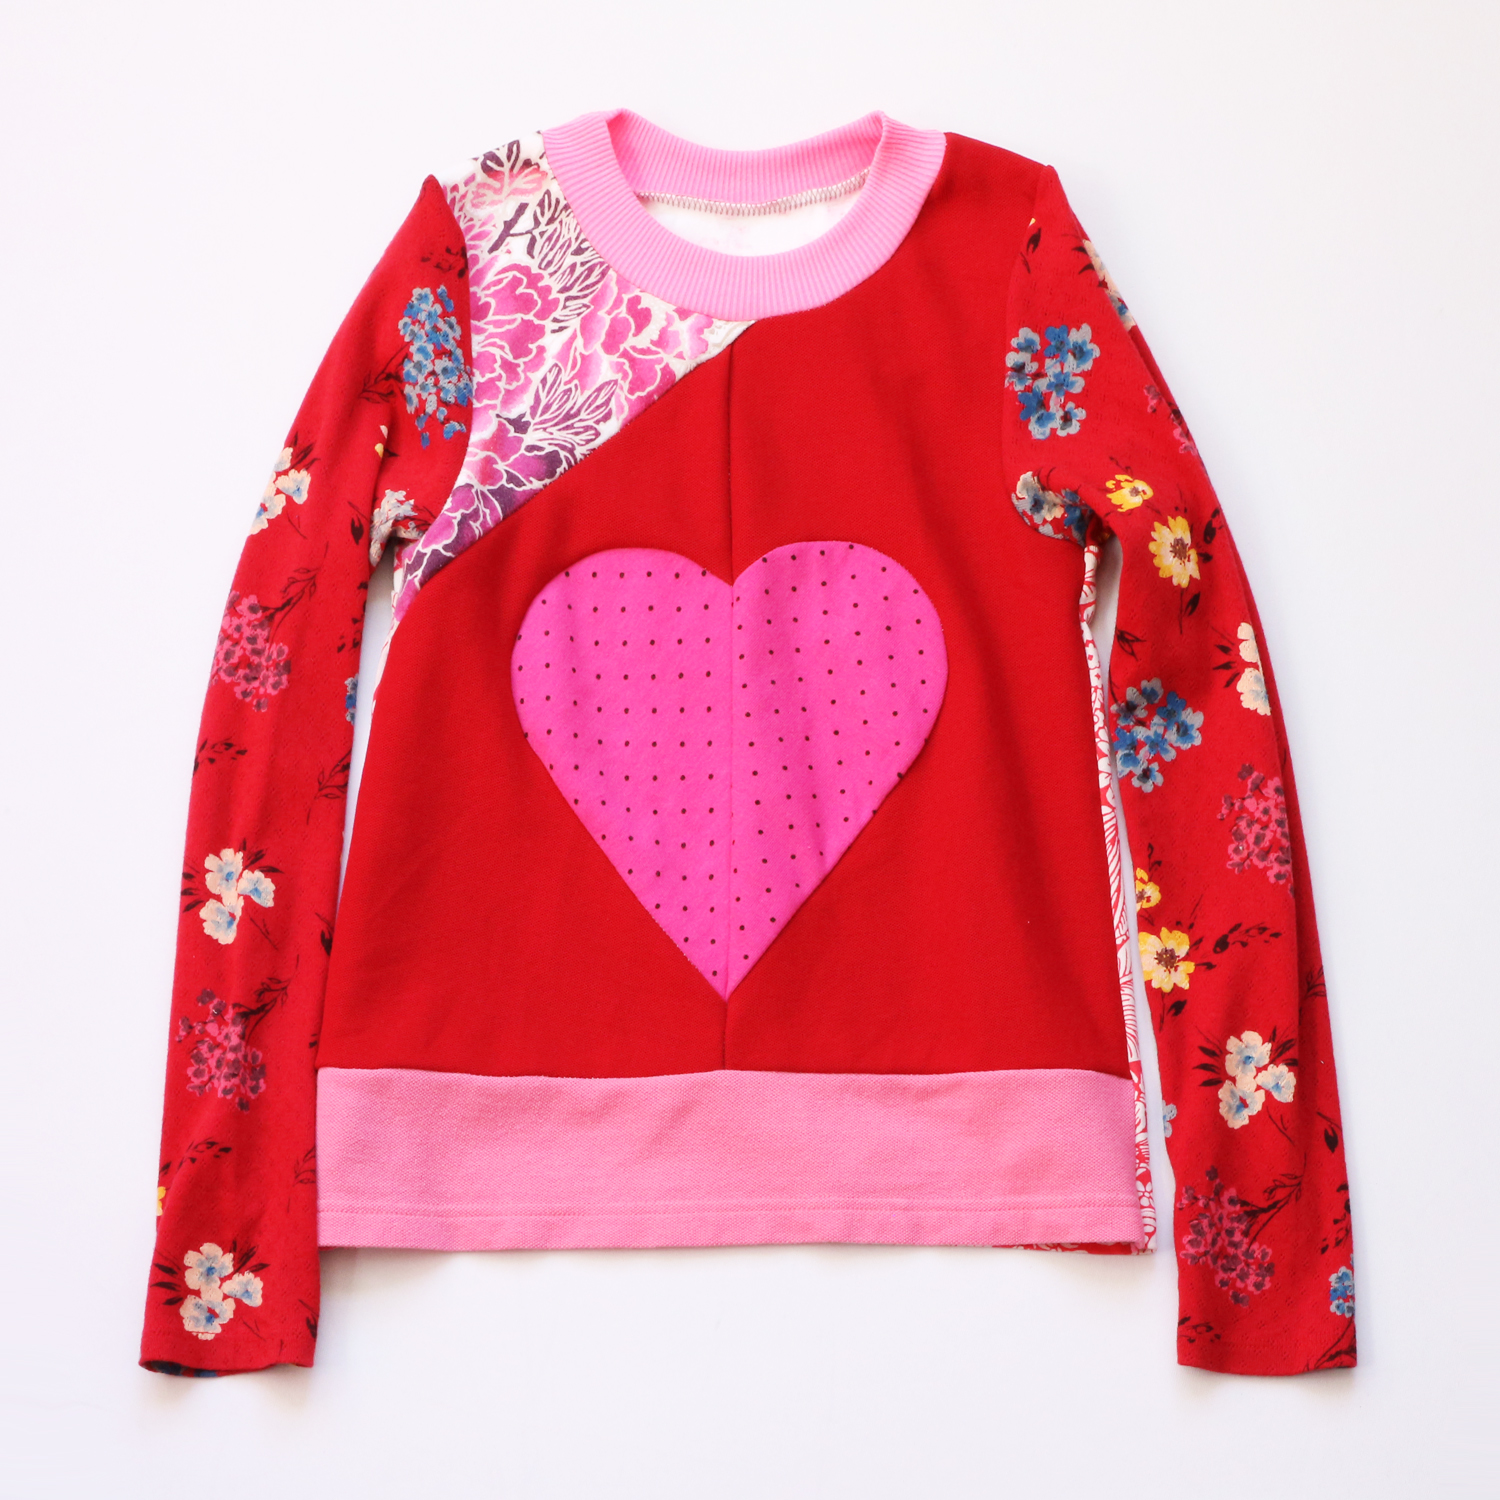 flat 8:10 floral:red:patchwork:heart:ls:top .jpg